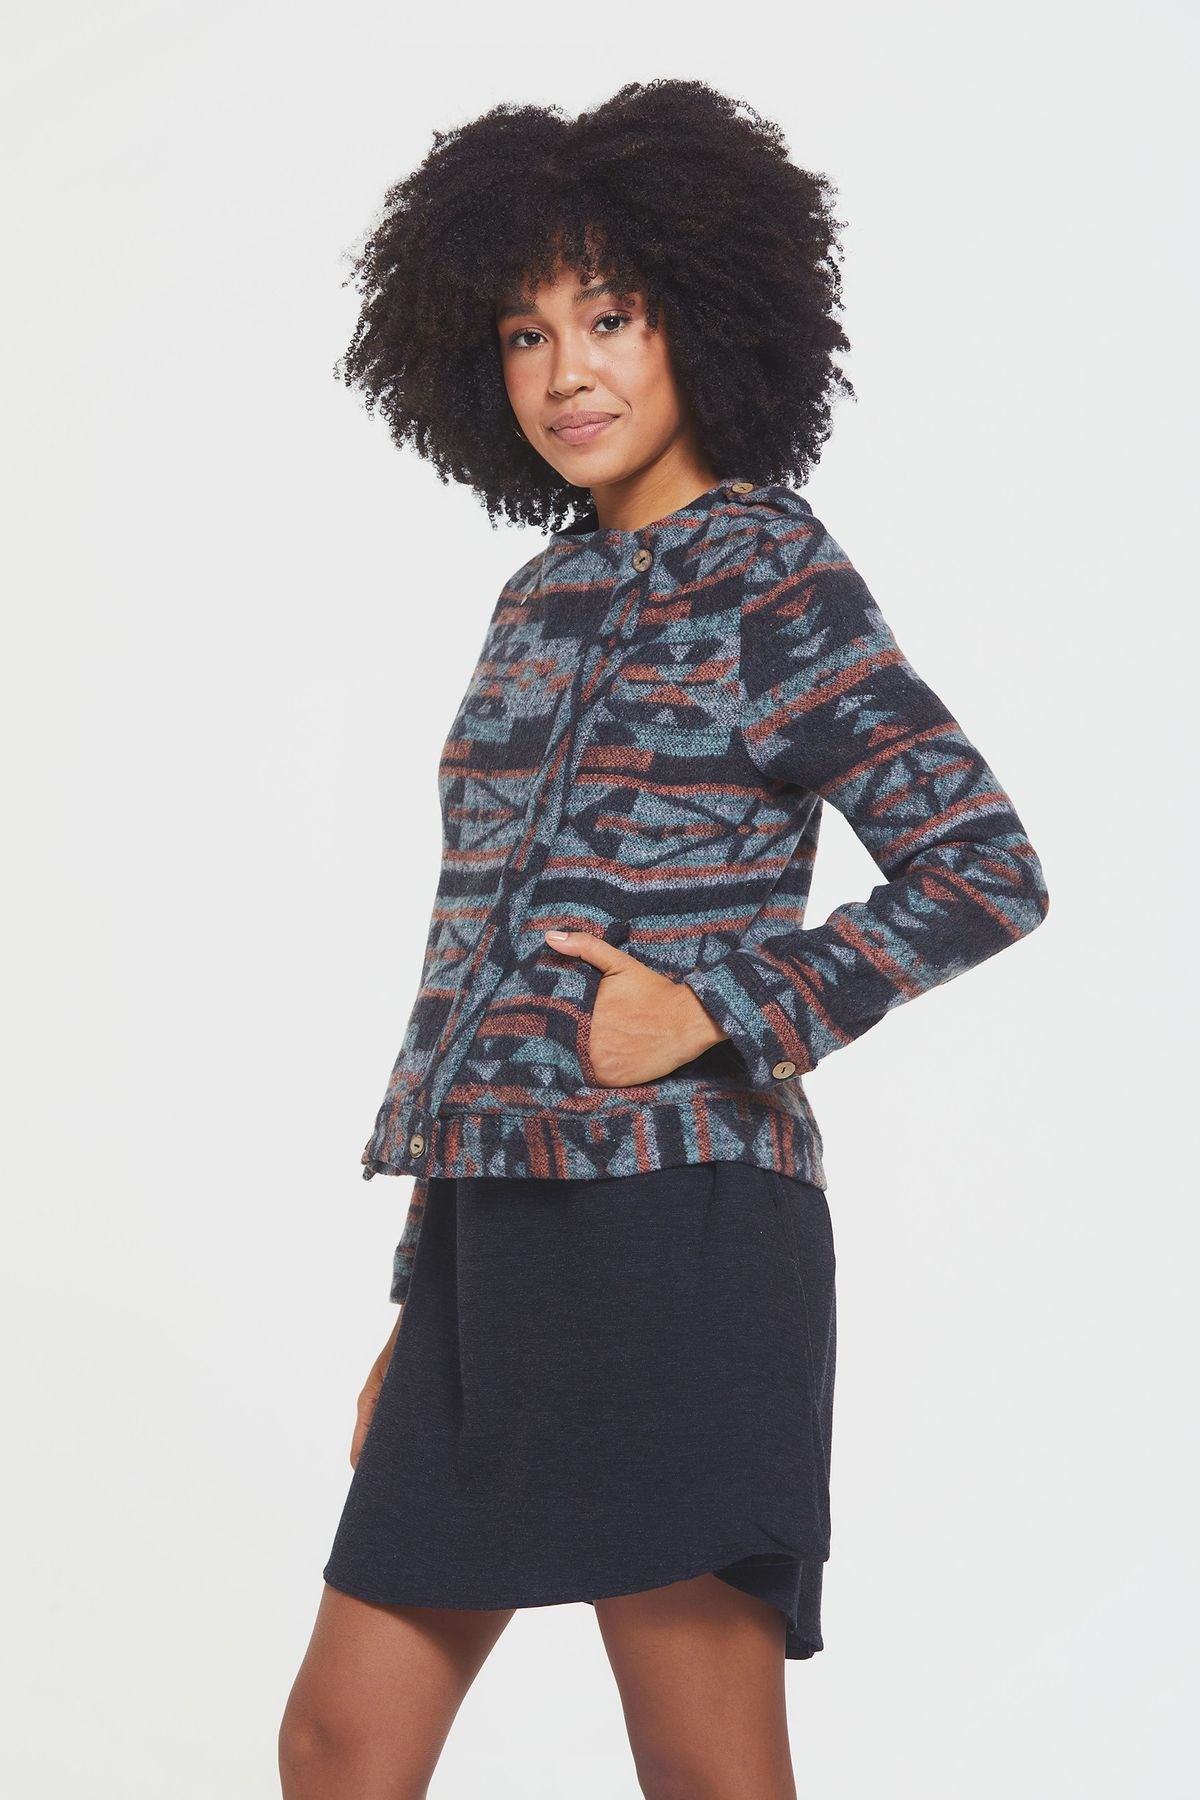 Ethnic Patterned Women's Jacket with Lining Black